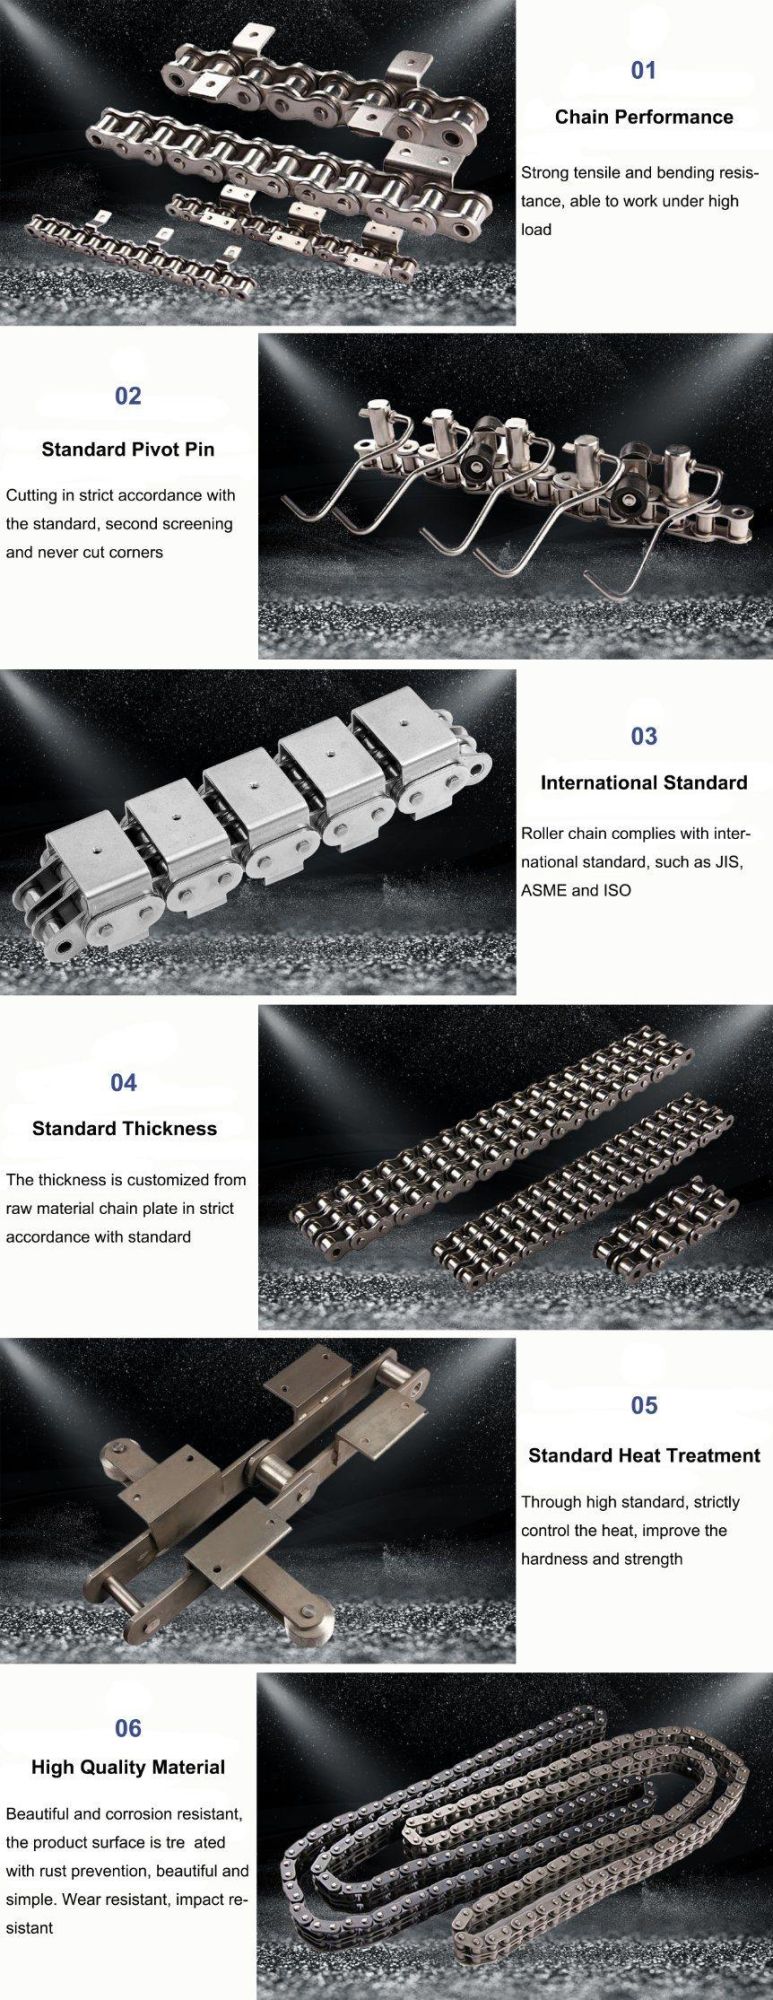 Professional Conveyor Chain Manufacturer Stainless Steel Lumber 3939 Series Conveyor Chain